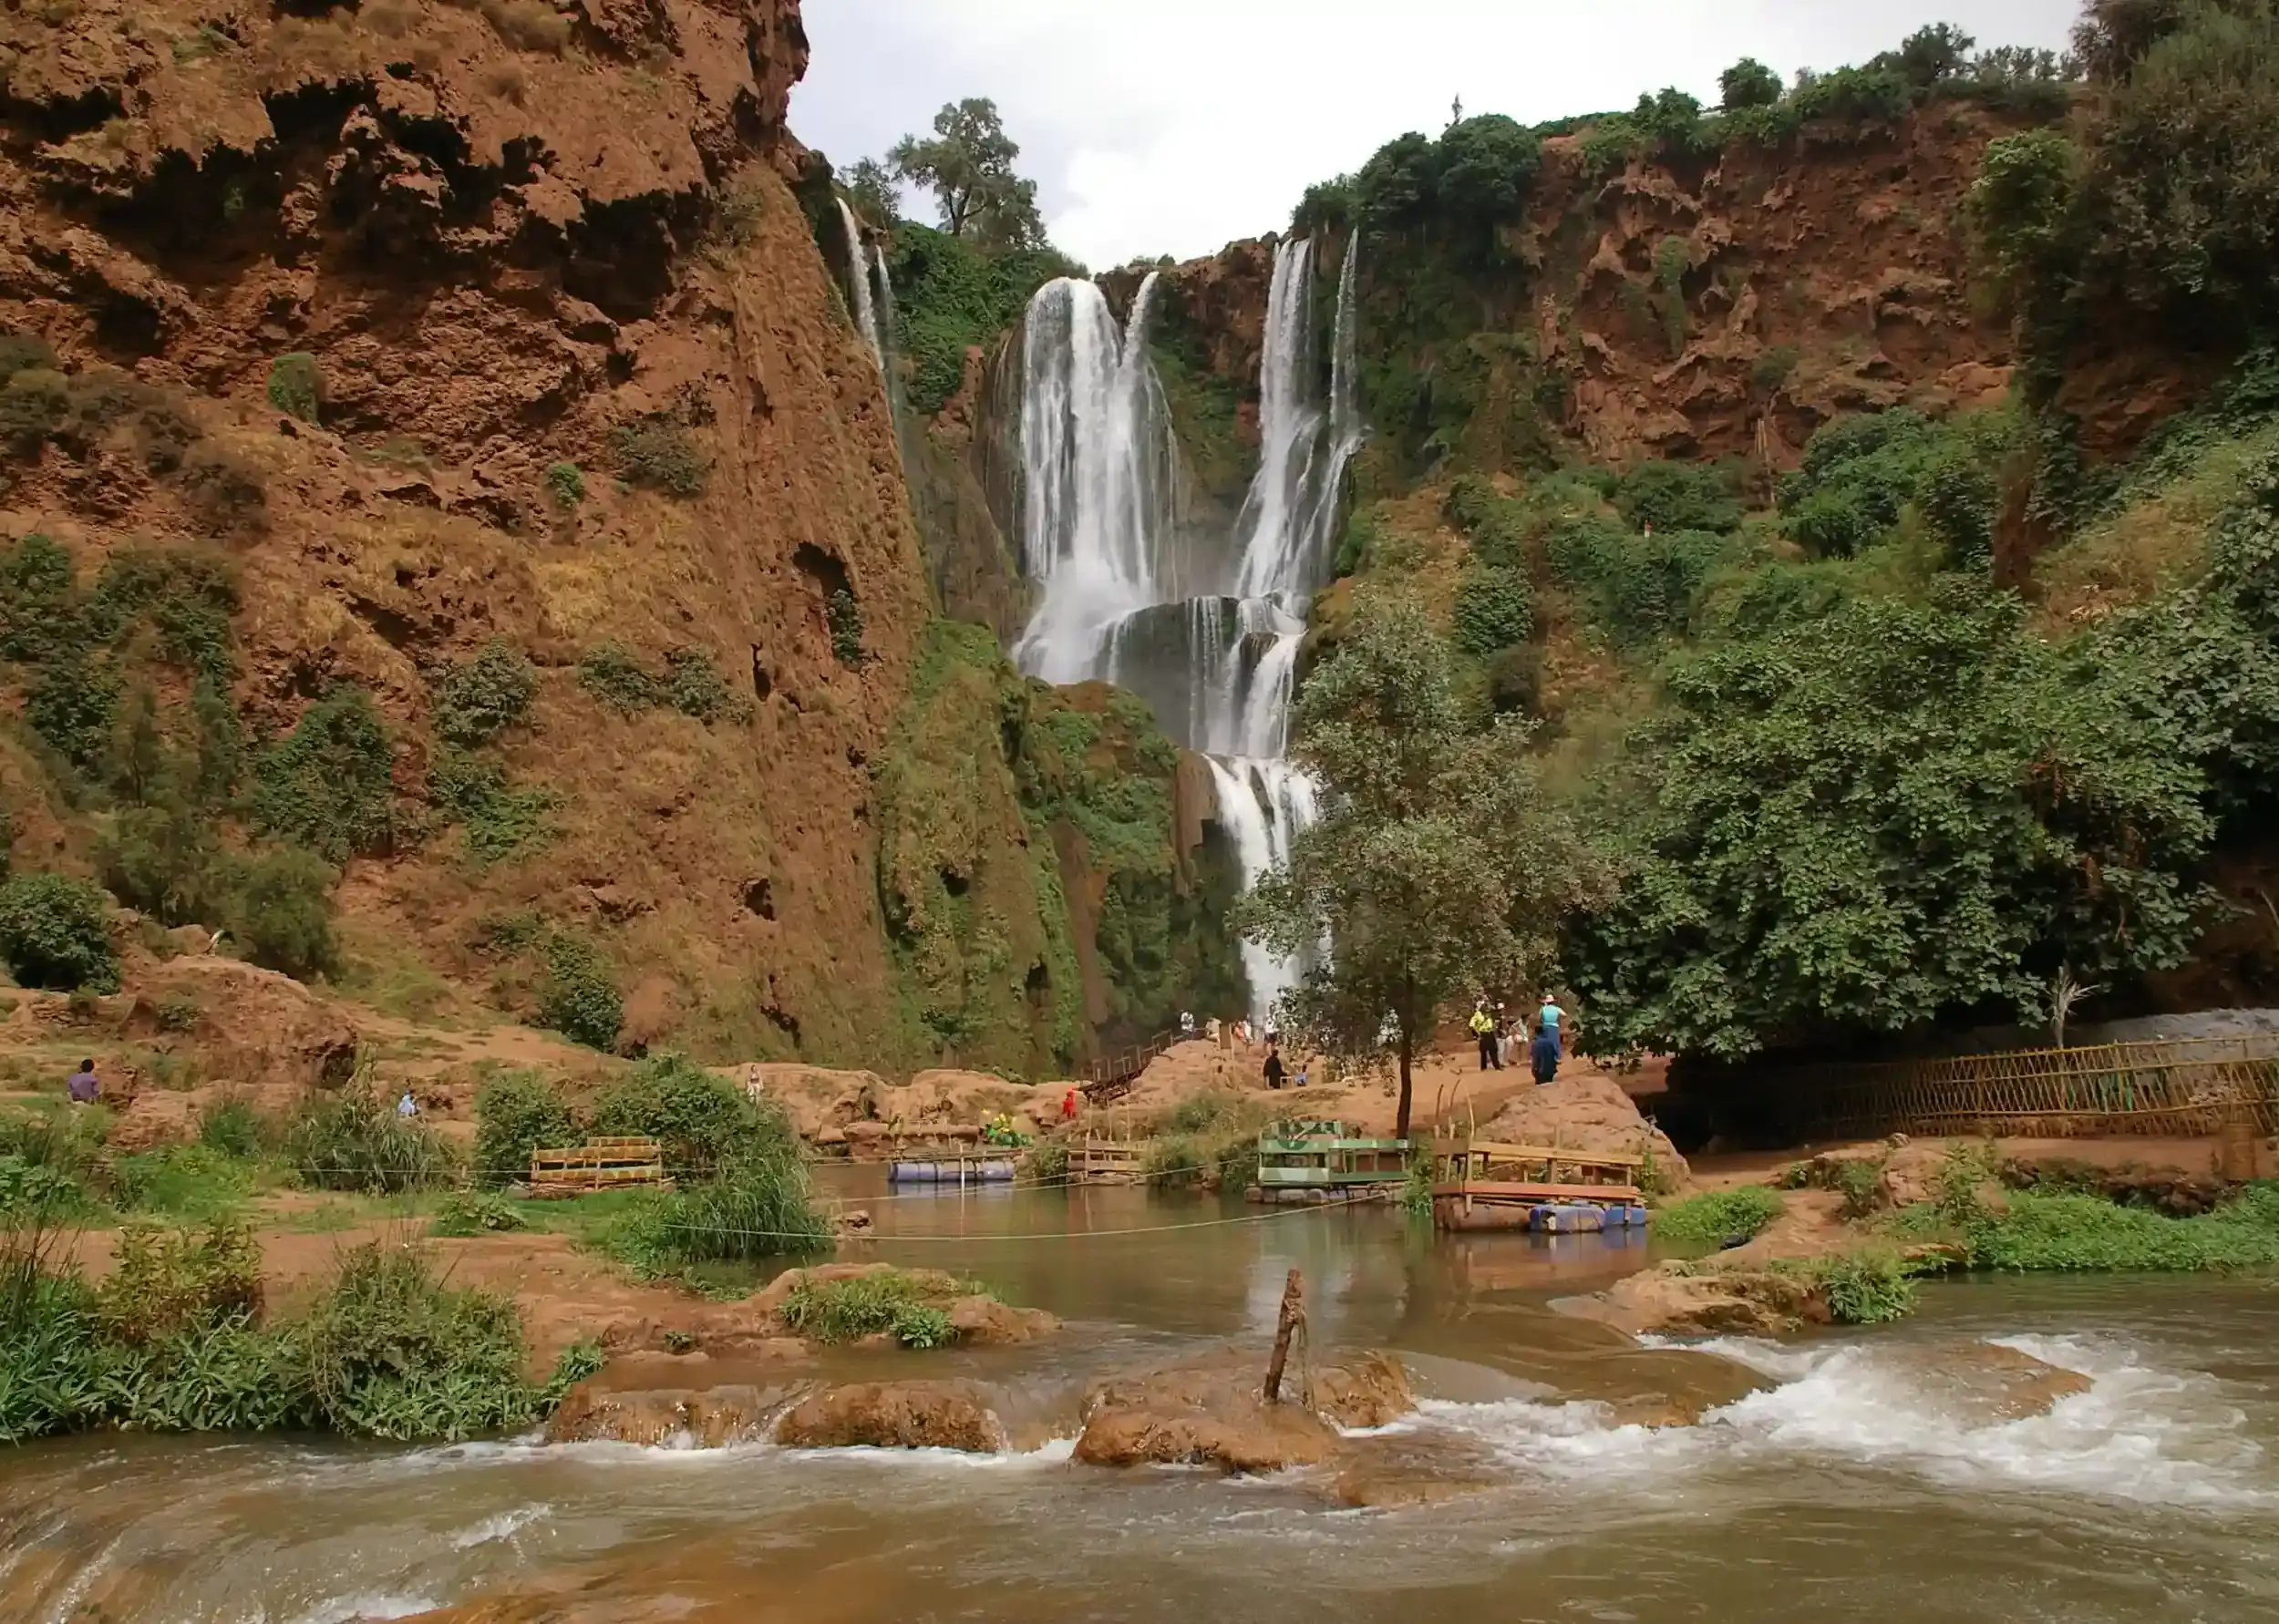 Ouzoud Waterfalls, a refreshing destination during your stay at our guesthouse in Marrakech